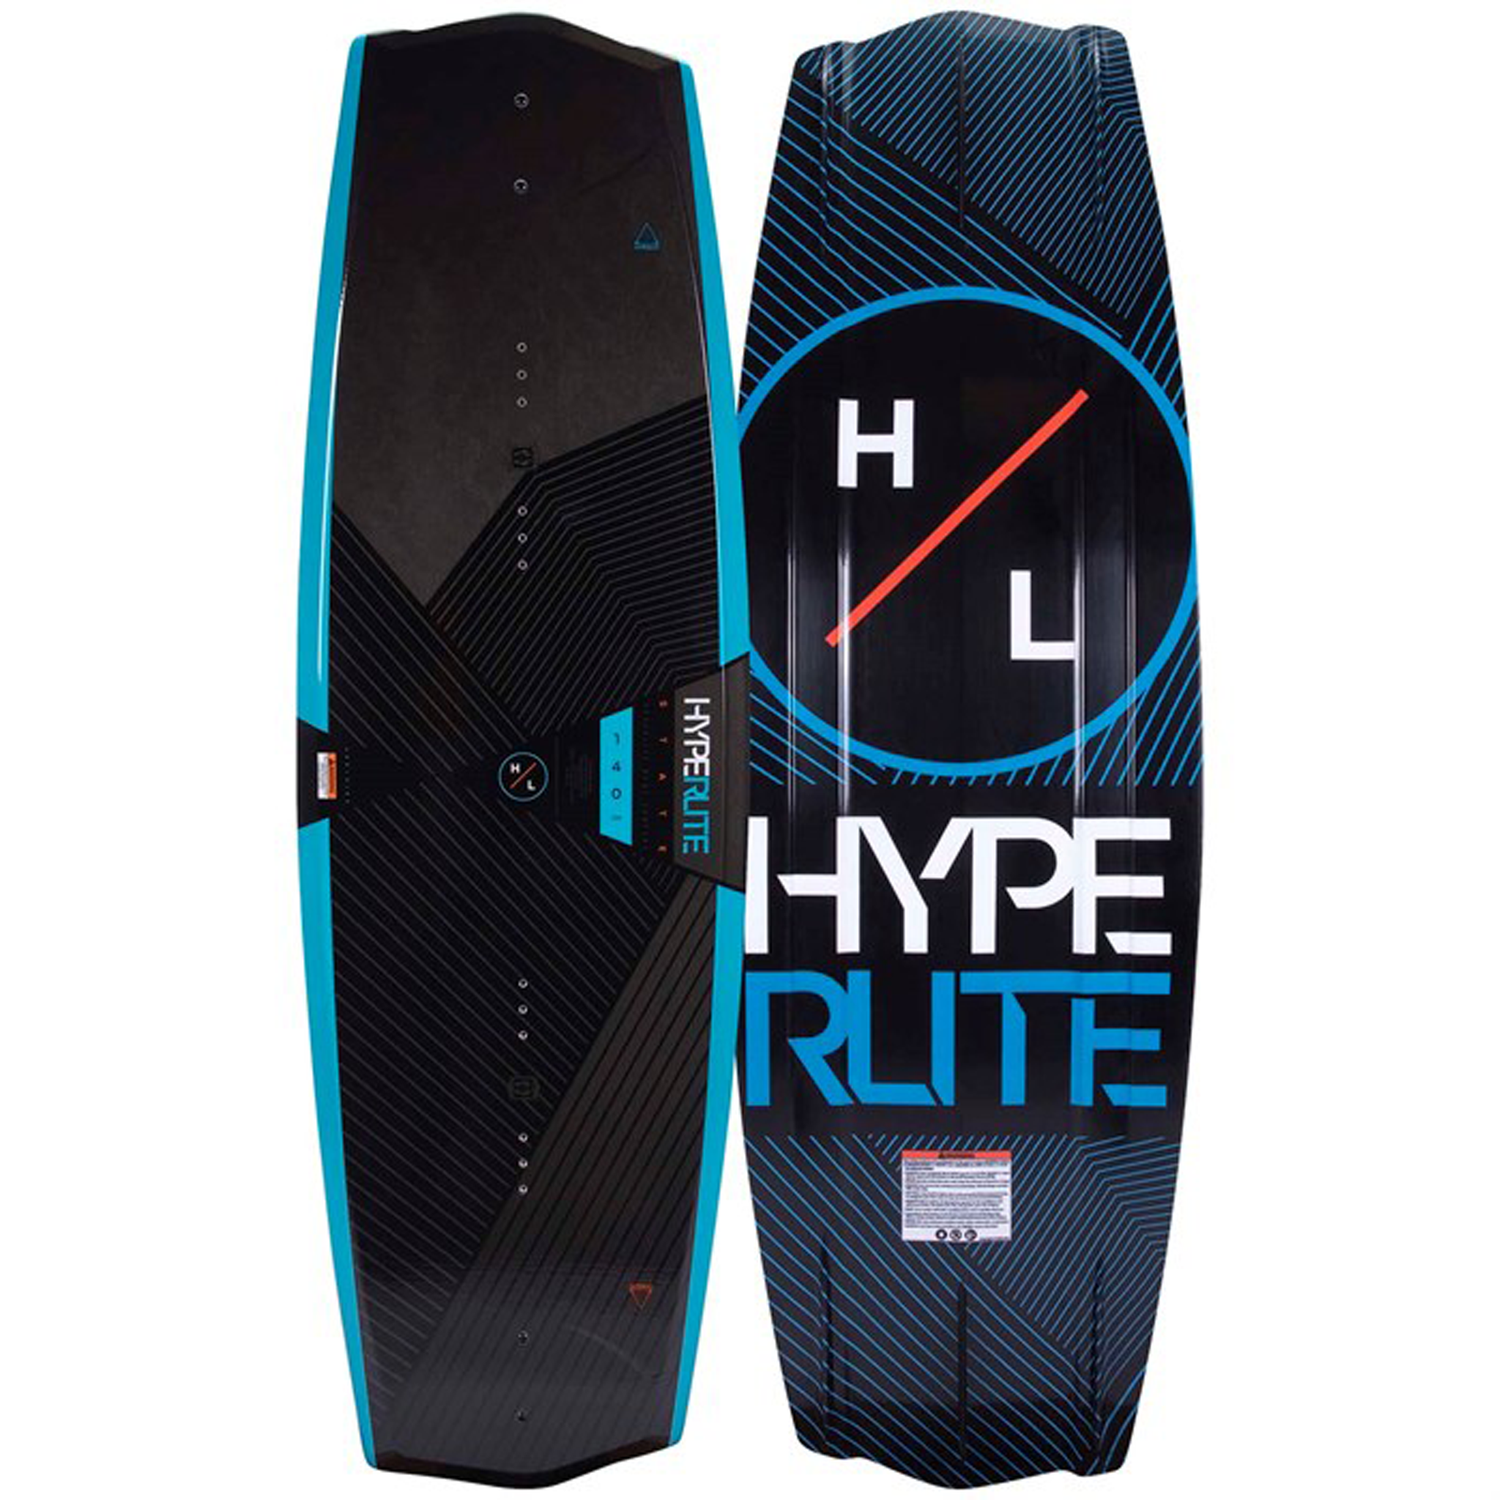 Birds eye view (left) and bottom view (right) of the Hyperlite state 2.0 Wakeboard